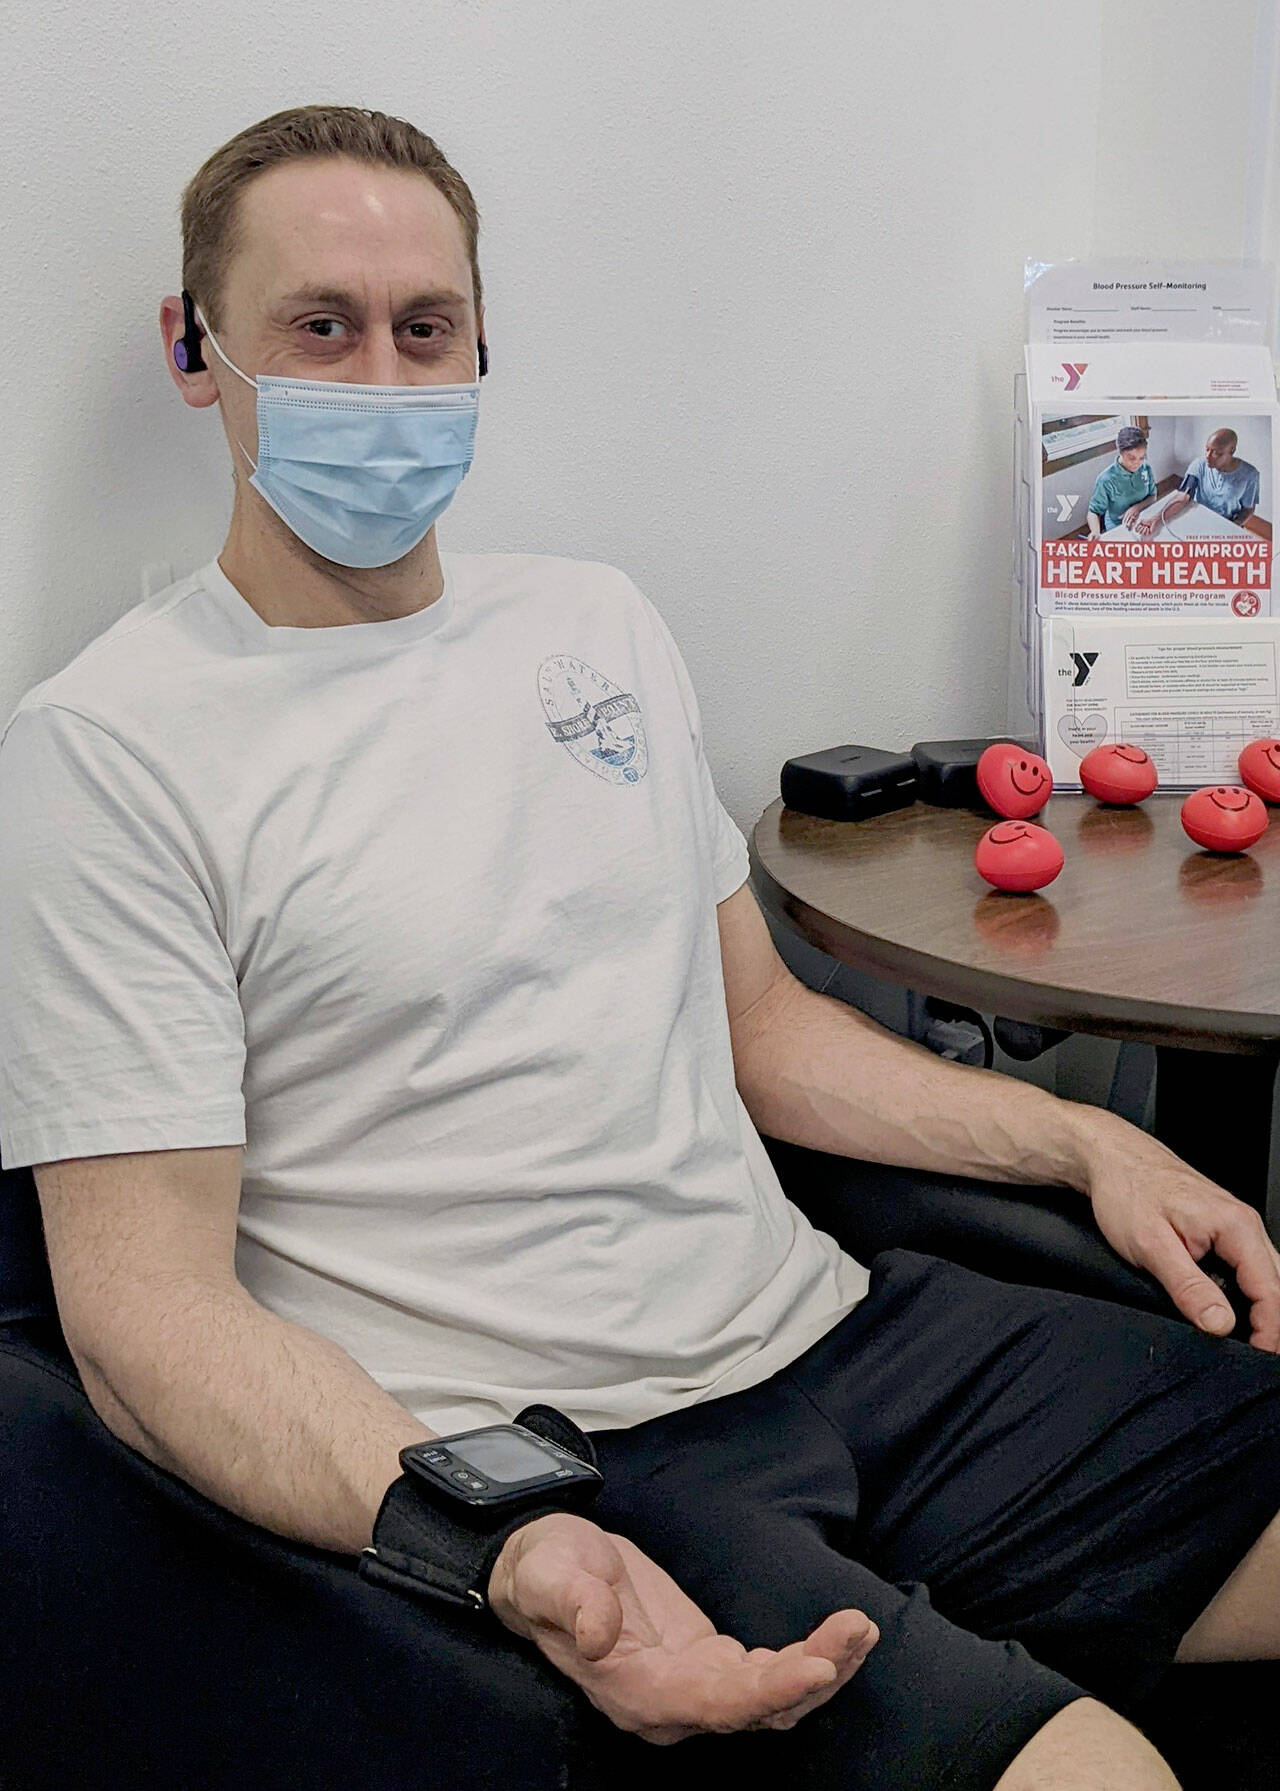 YMCA of Sequim member Nick Durso takes his blood pressure using a wrist blood pressure monitoring cuff at the YMCA of Sequim. (Photo courtesy of YMCA of Sequim)